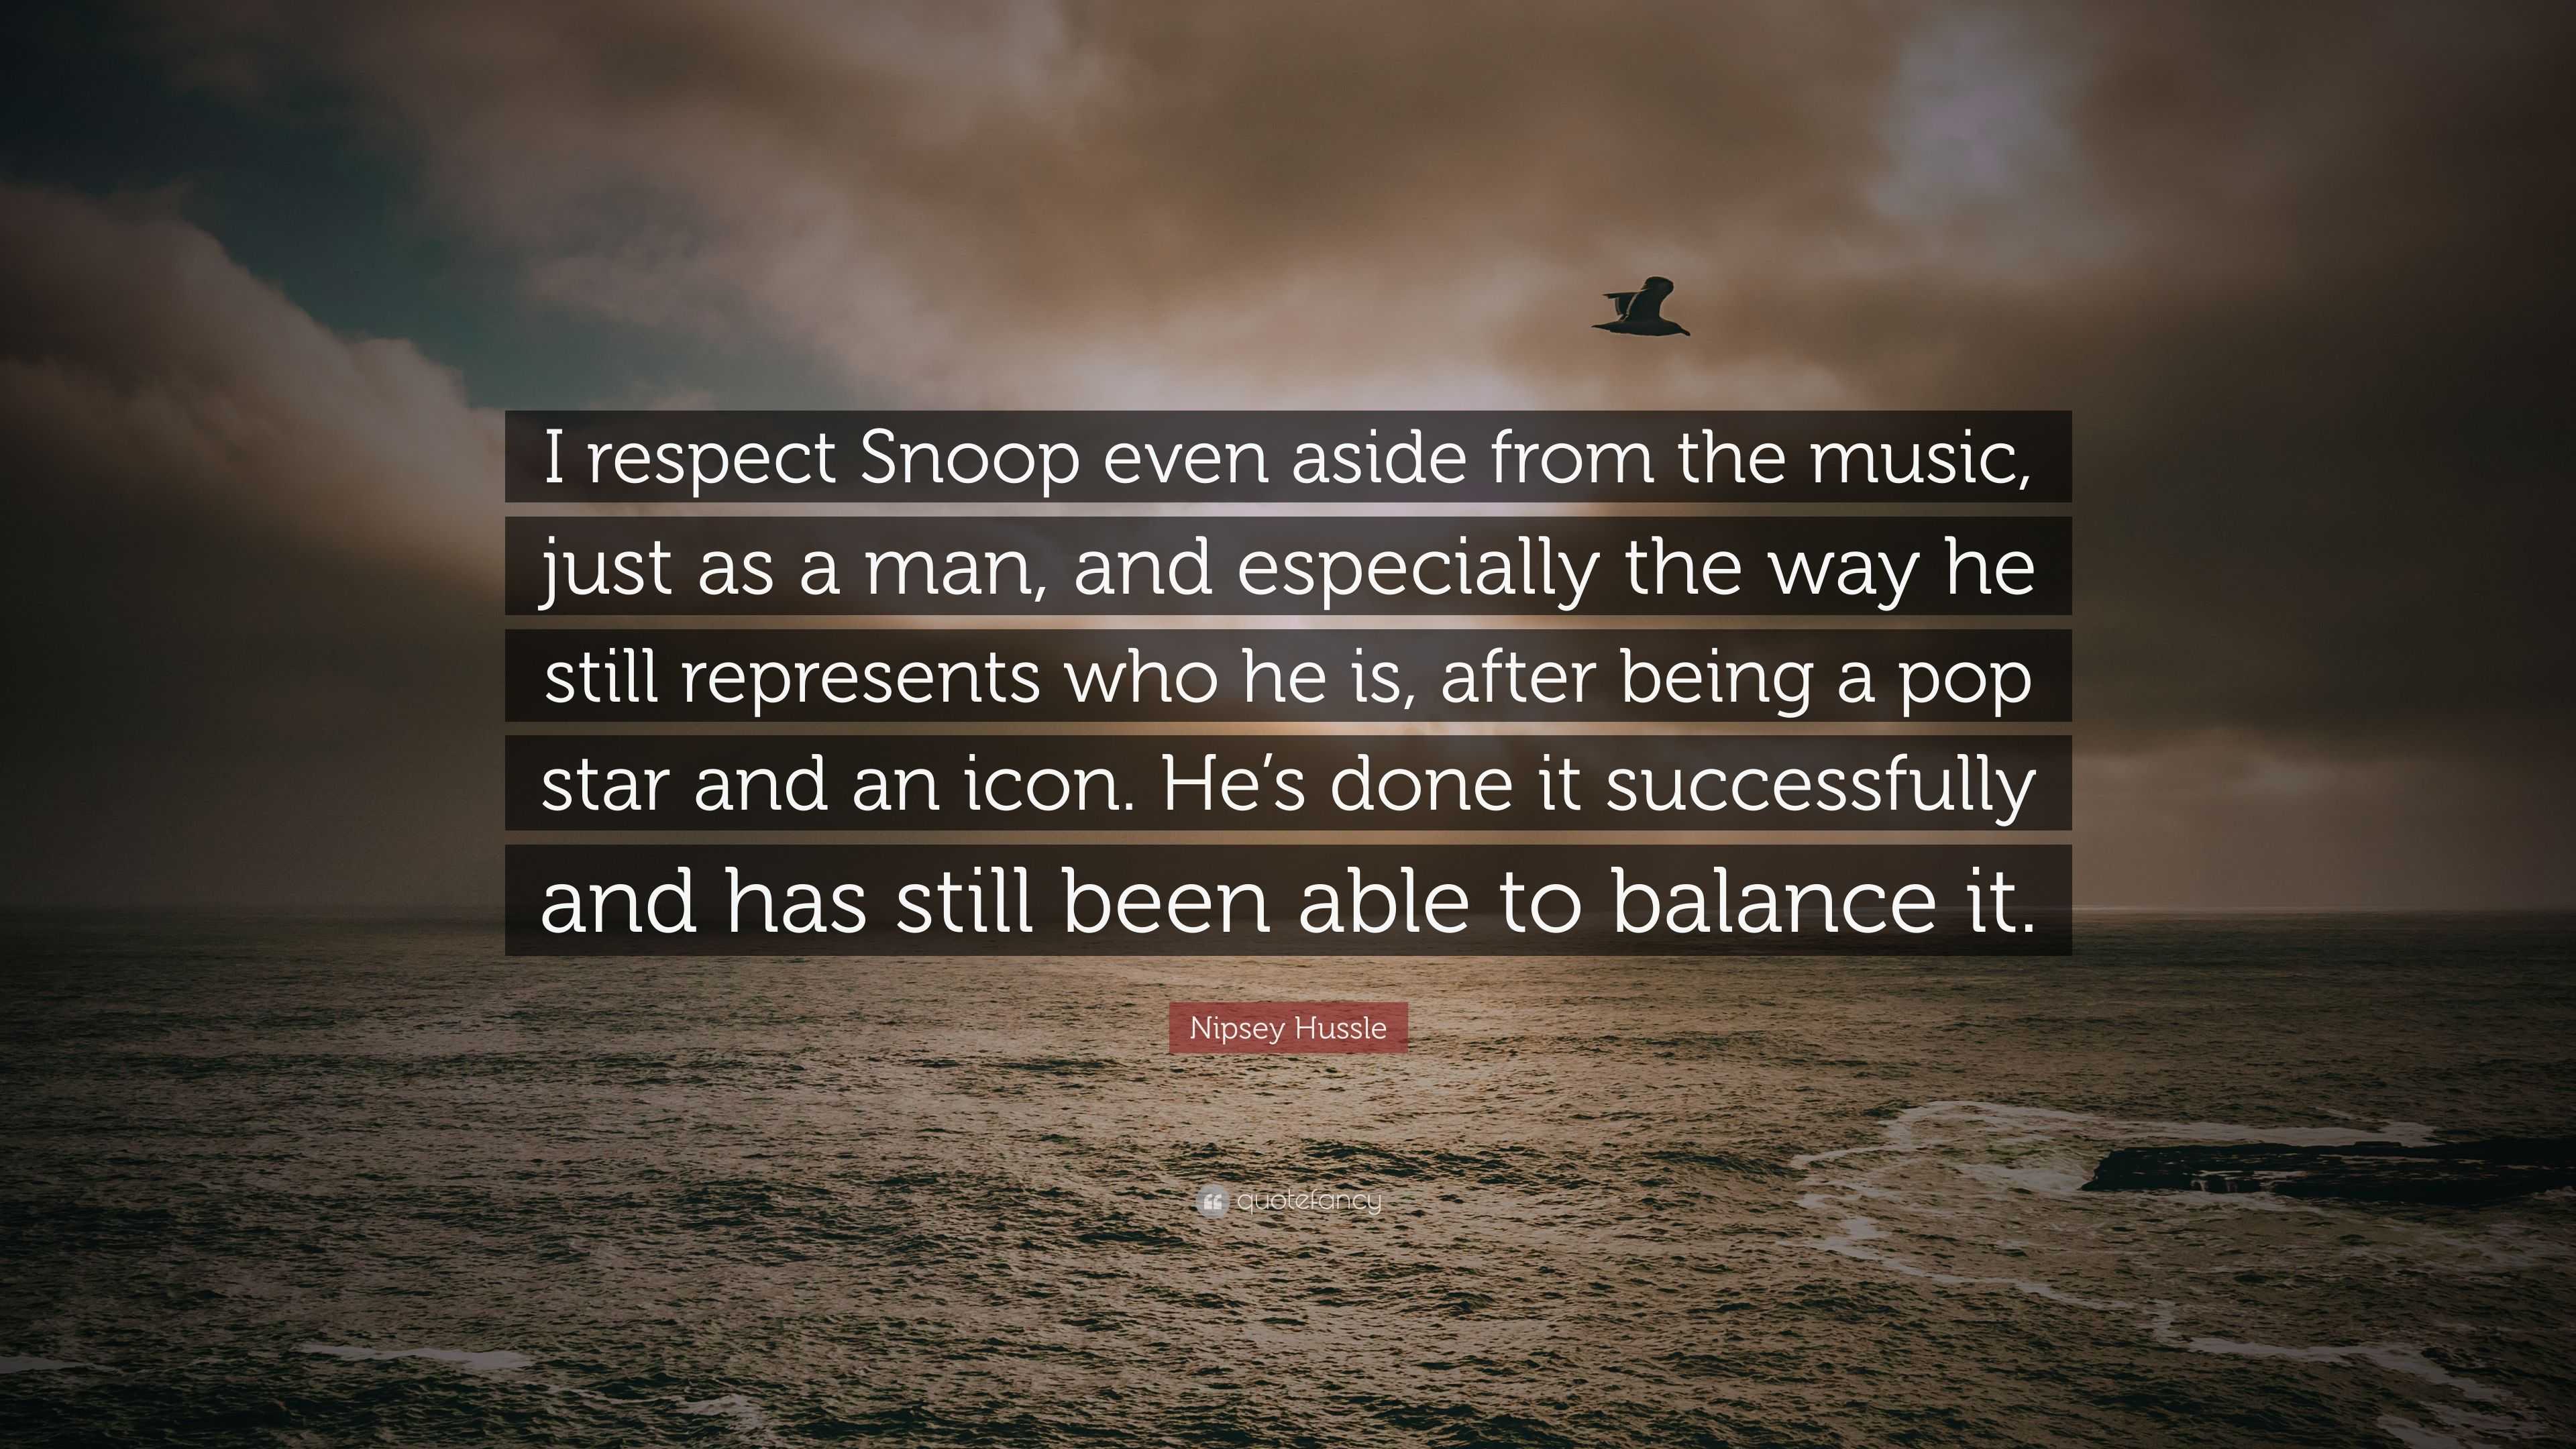 Nipsey Hussle Quotes About Respect : 124 Respect Quotes By ...